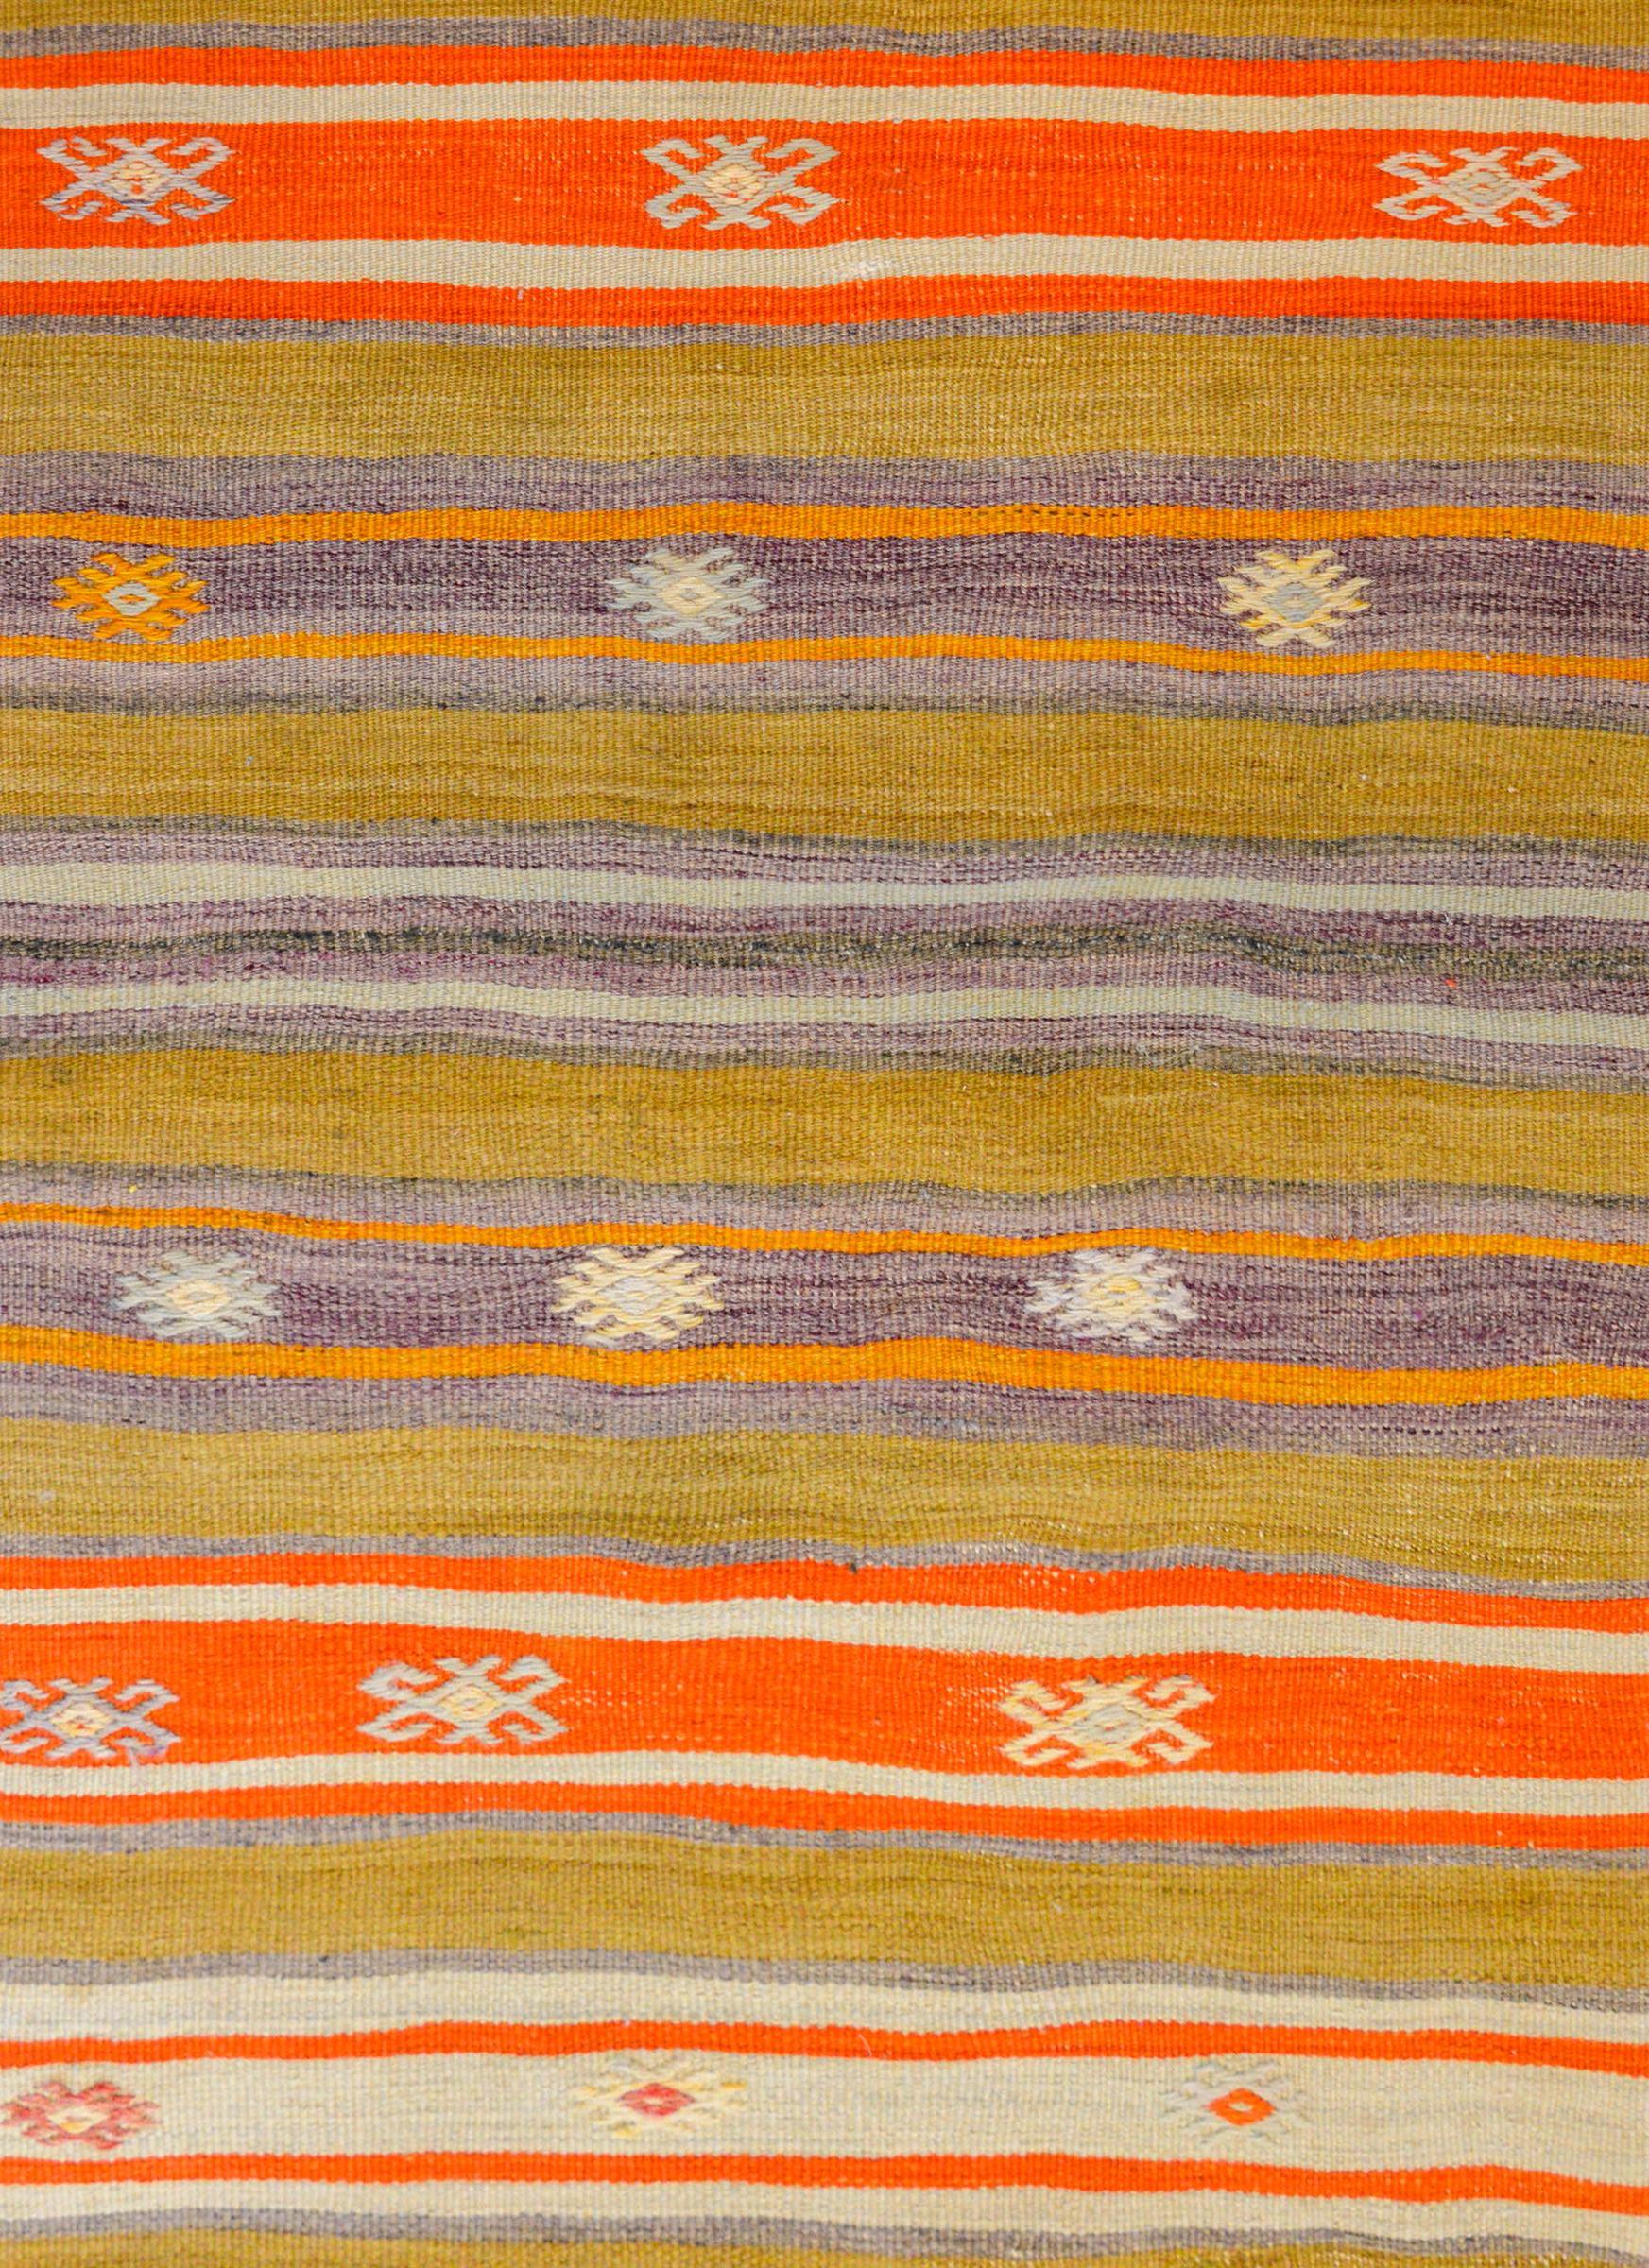 A gorgeous early 20th century Turkish Konya Kilim runner with a wonderful striped pattern woven in beautiful greens, oranges, golds, and lavenders, embellished with embroidered stylized flowers.